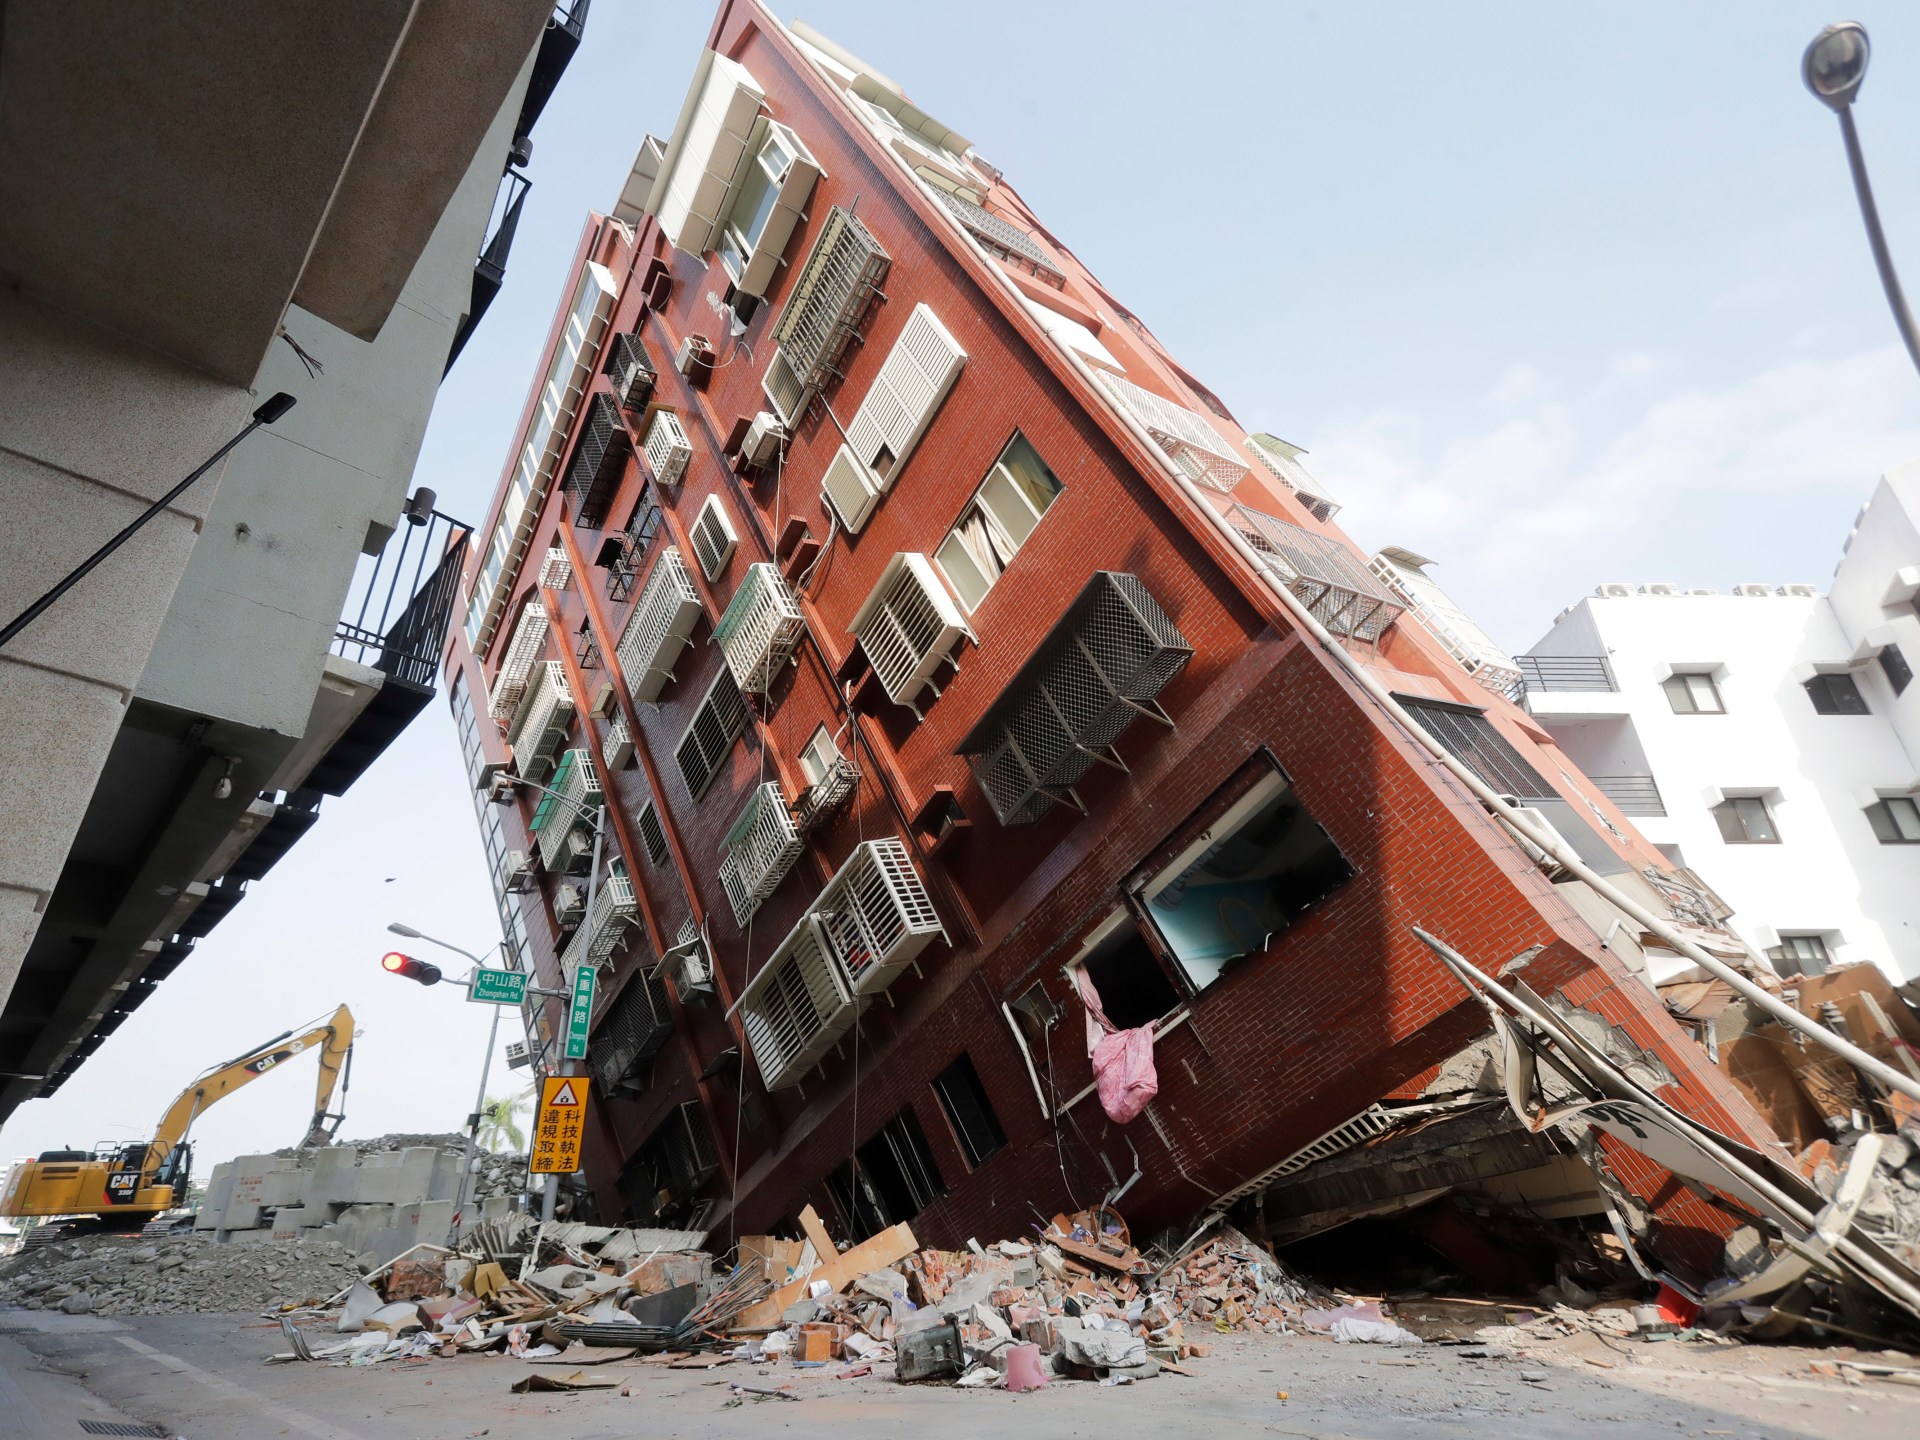 Taiwan says 1,000 injured in earthquake, rescue efforts focus on Hualien | Earthquakes News